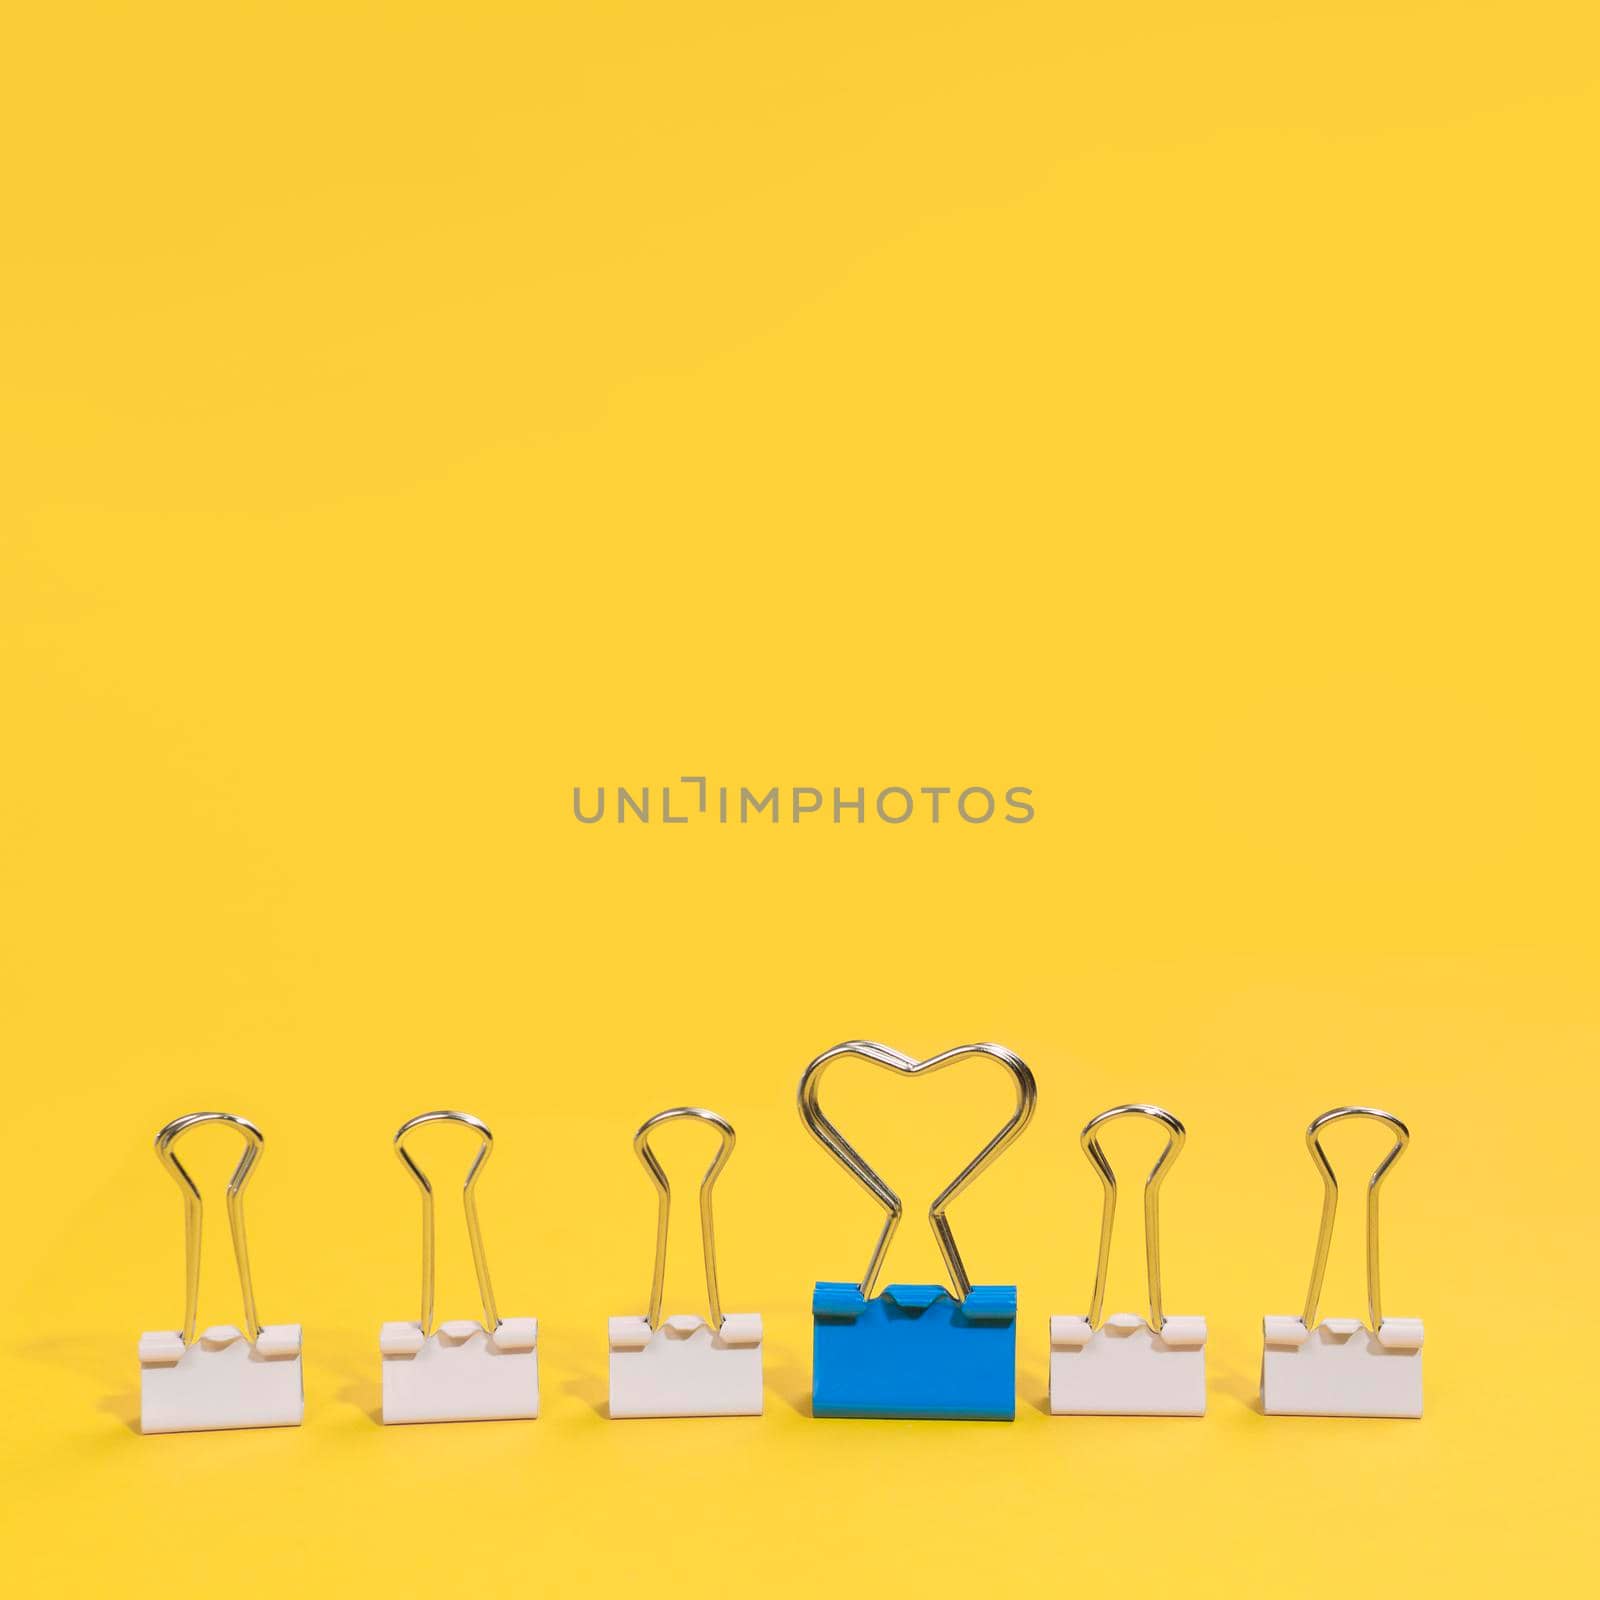 arrangement paper clips with one blue paper clip. High quality photo by Zahard